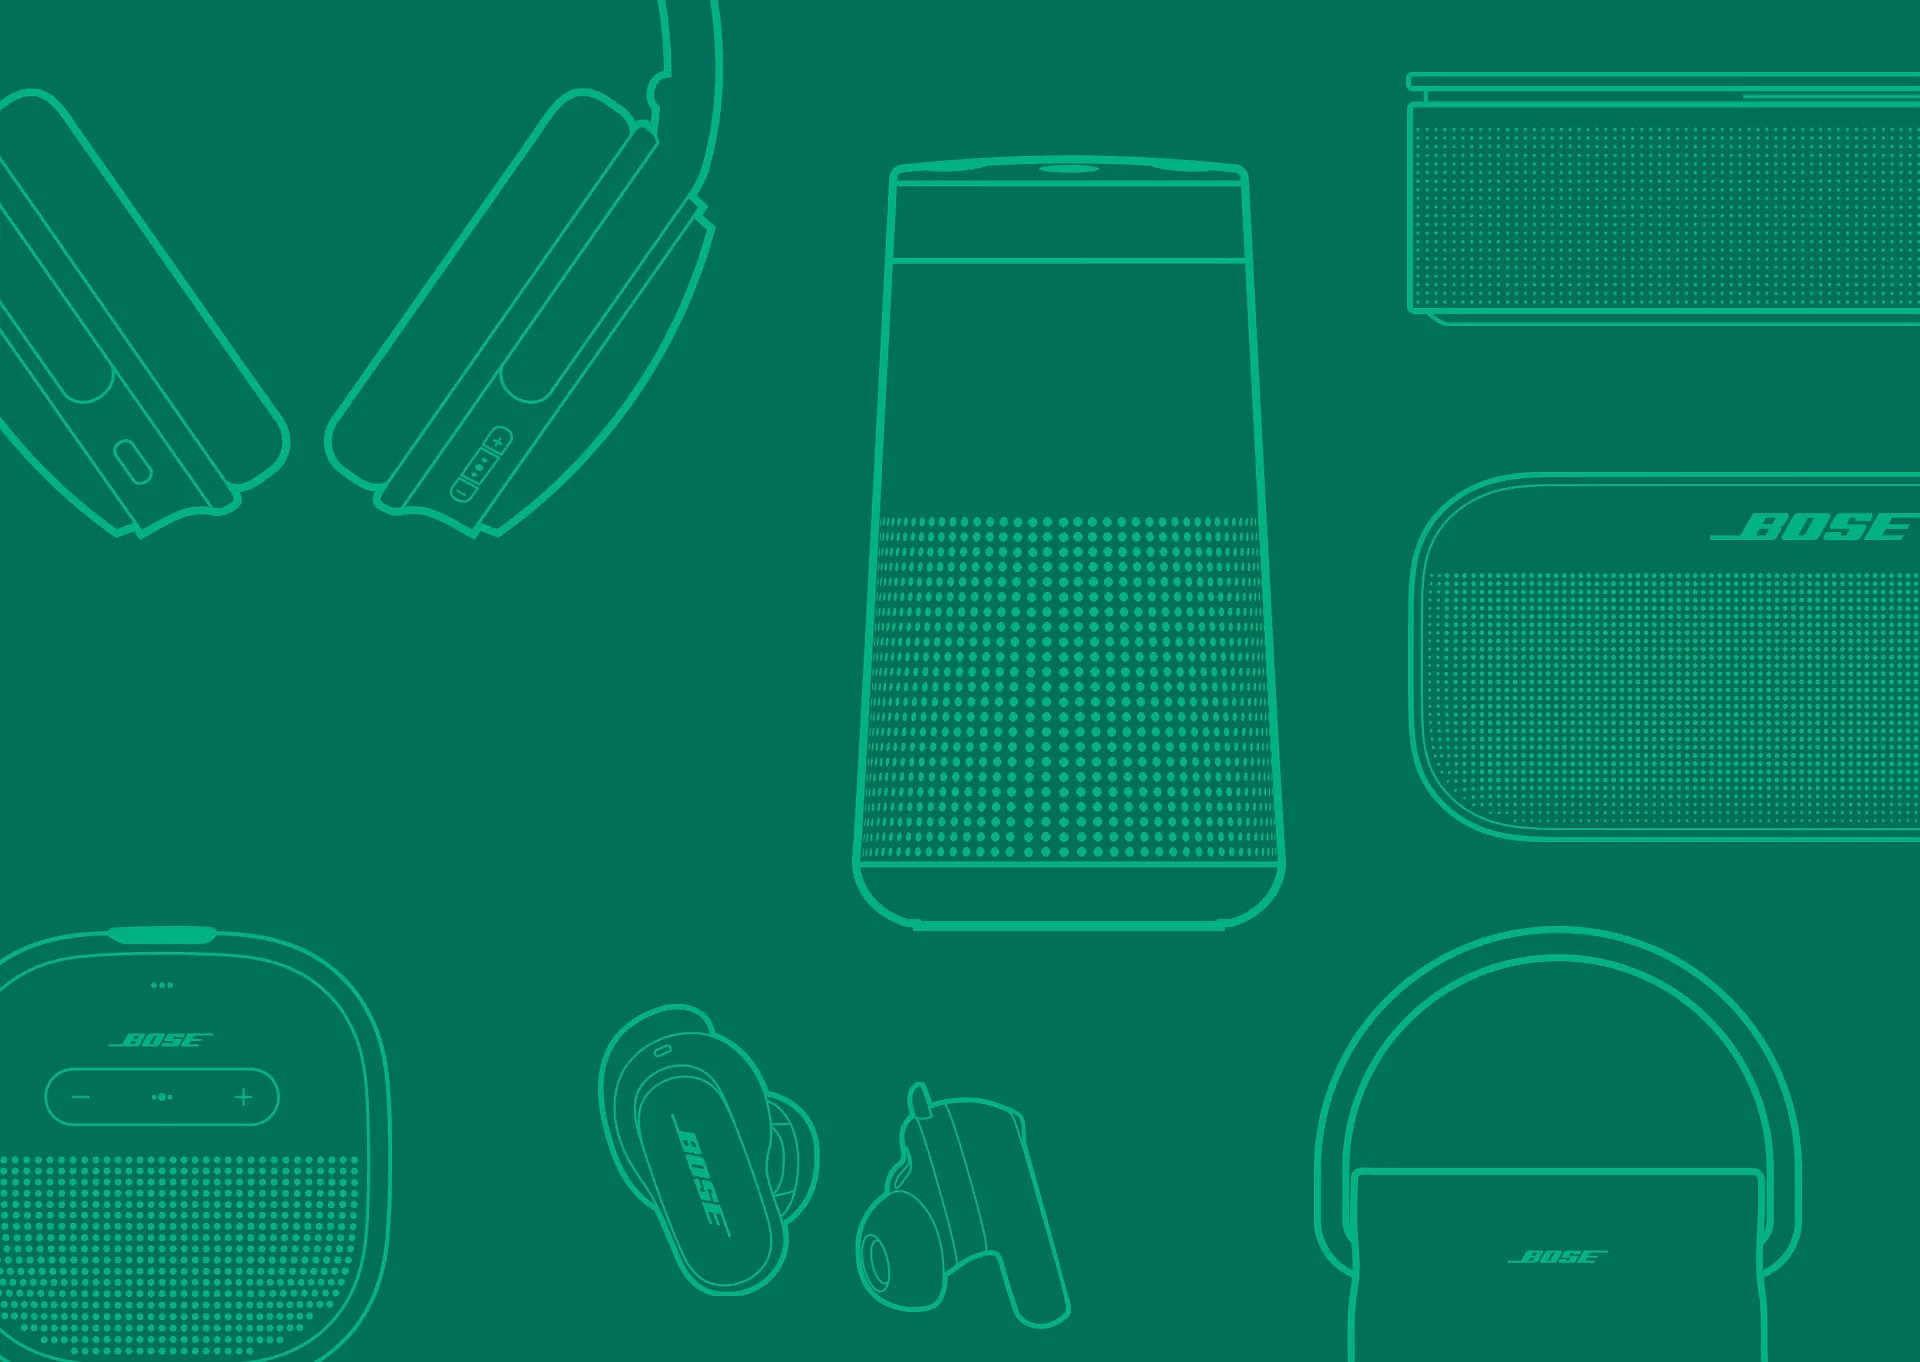 Bose refurbished products